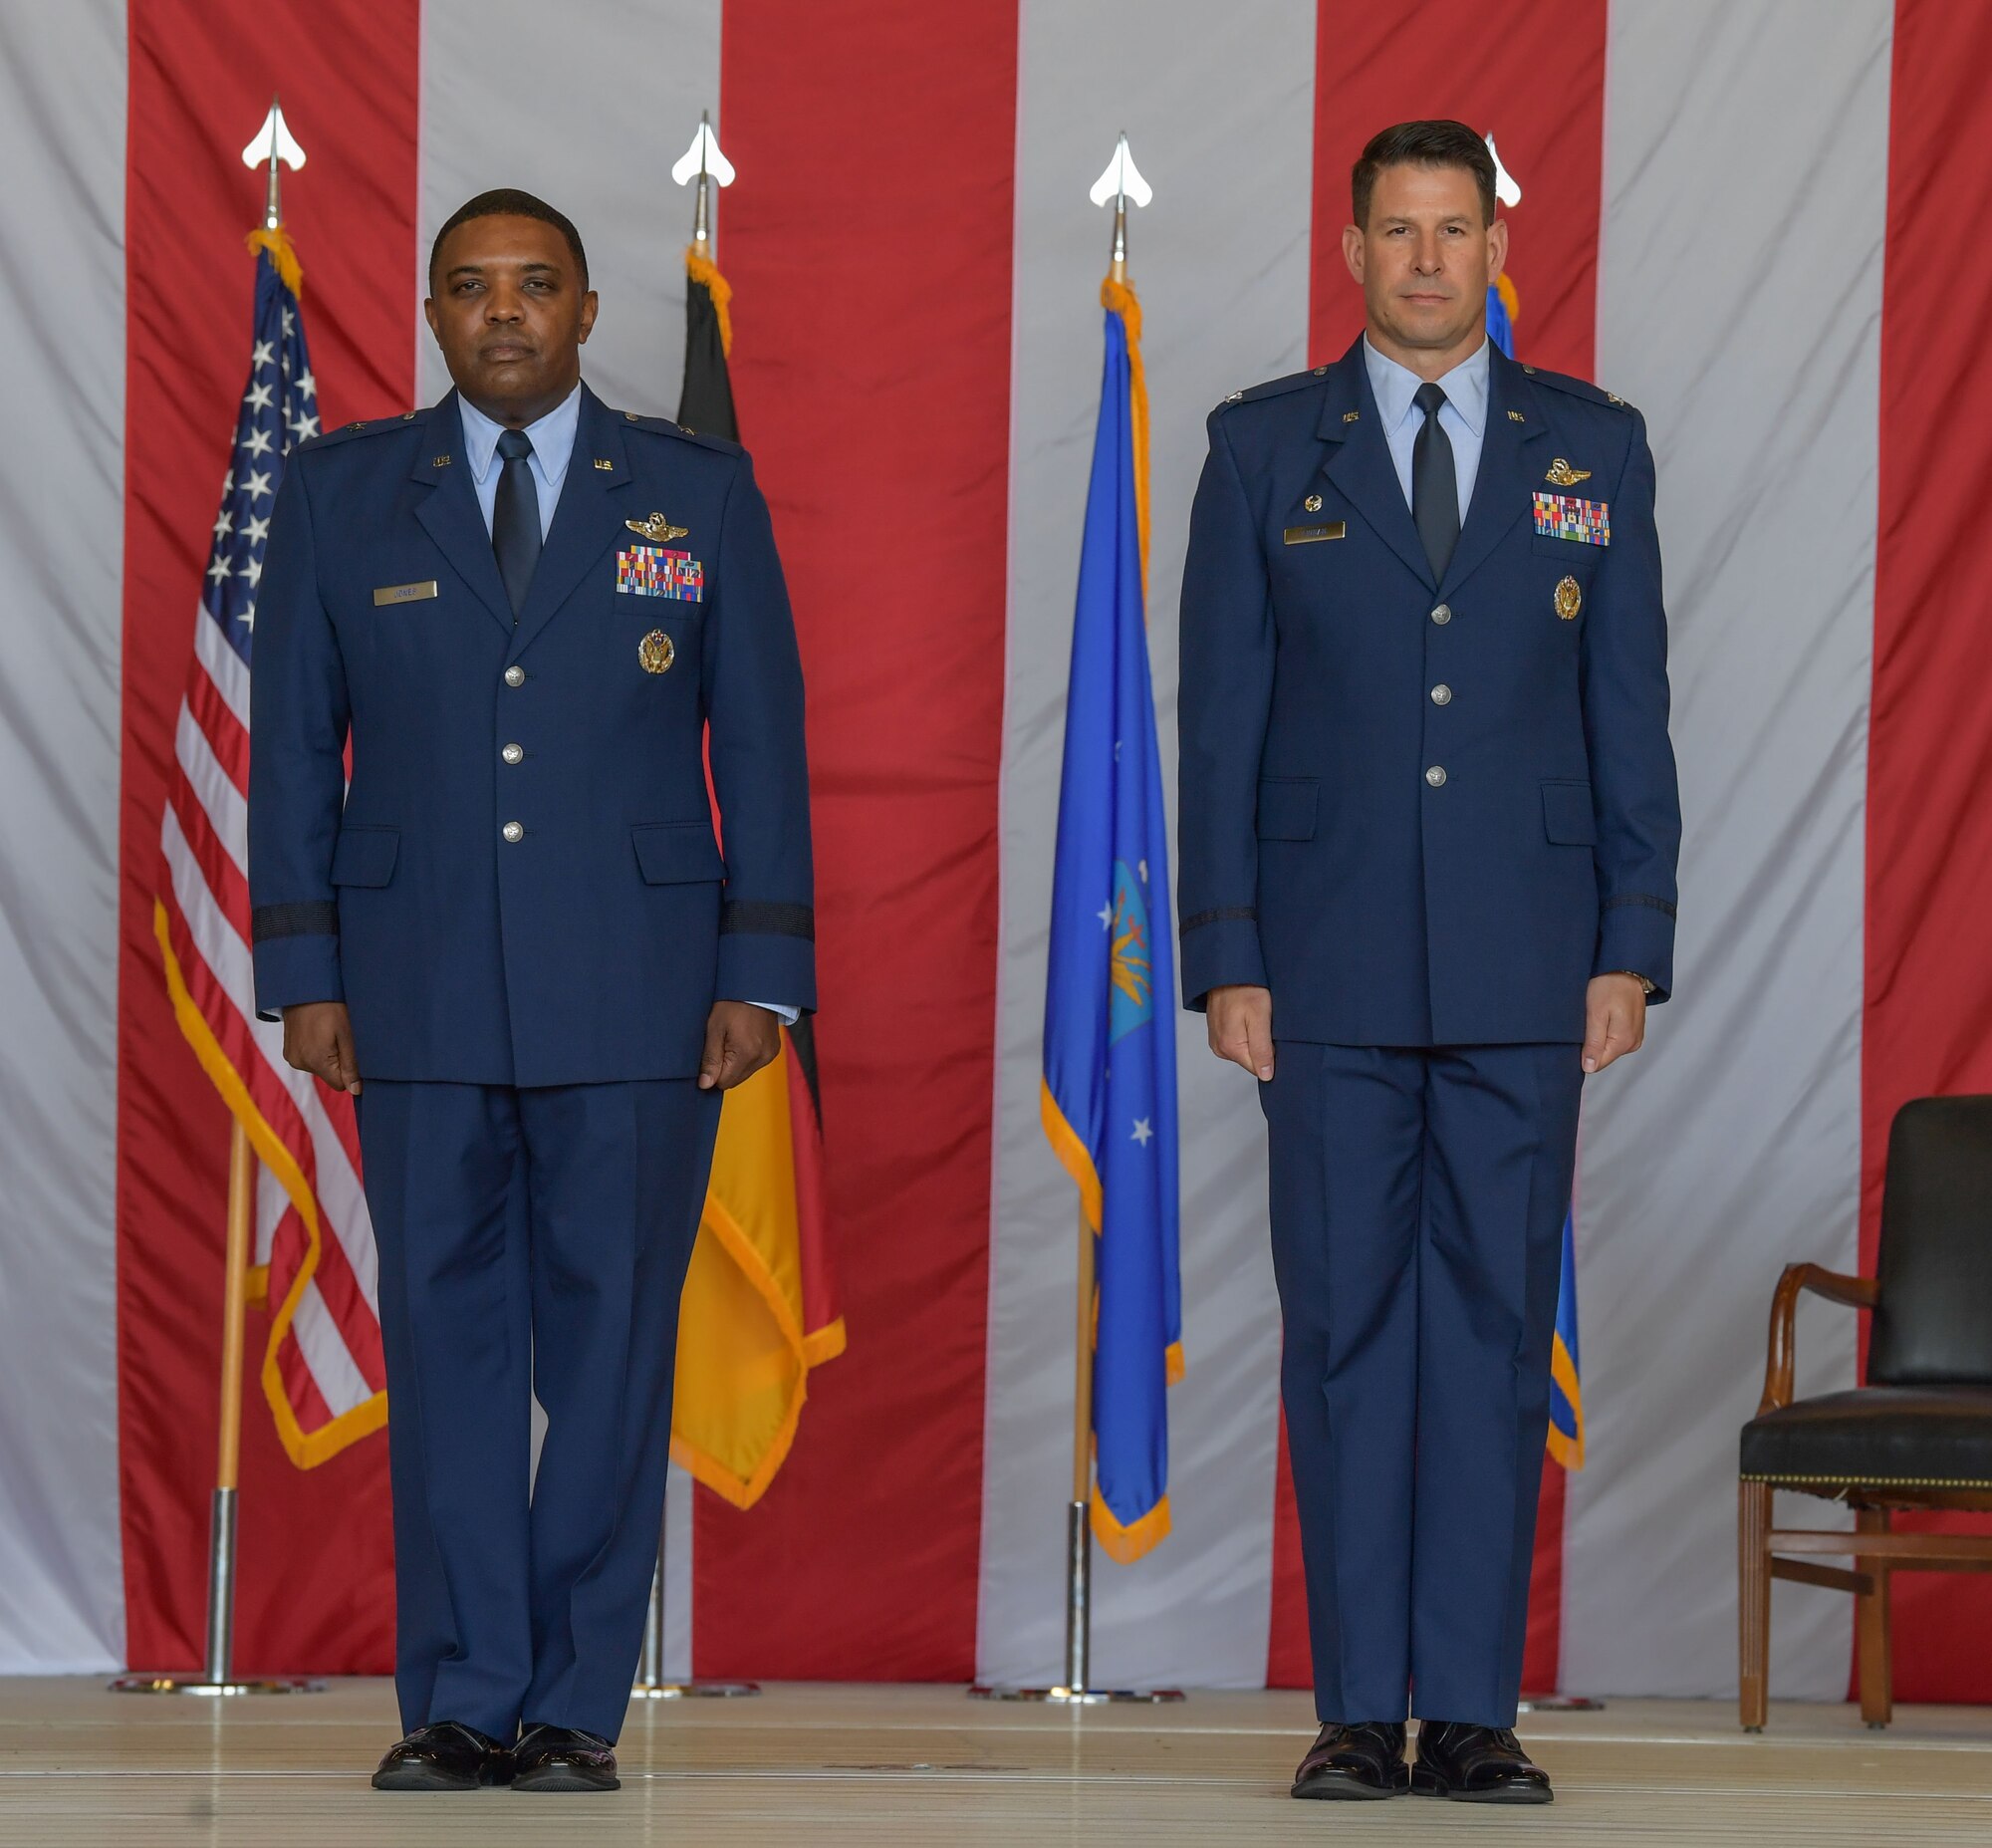 U.S. Air Force Brig. Gen. Otis C. Jones, 86th Airlift Wing commander, left, and Col. Sean Finnan, 86th Operations Group out-going commander, stand at attention during the 86th OG change of command ceremony at Ramstein Air Base, Germany, June 15, 2023. Finnan relinquished command of the 86th OG to Col. Bret Echard. (U.S. Air Force photo by Airman Trevor Calvert)